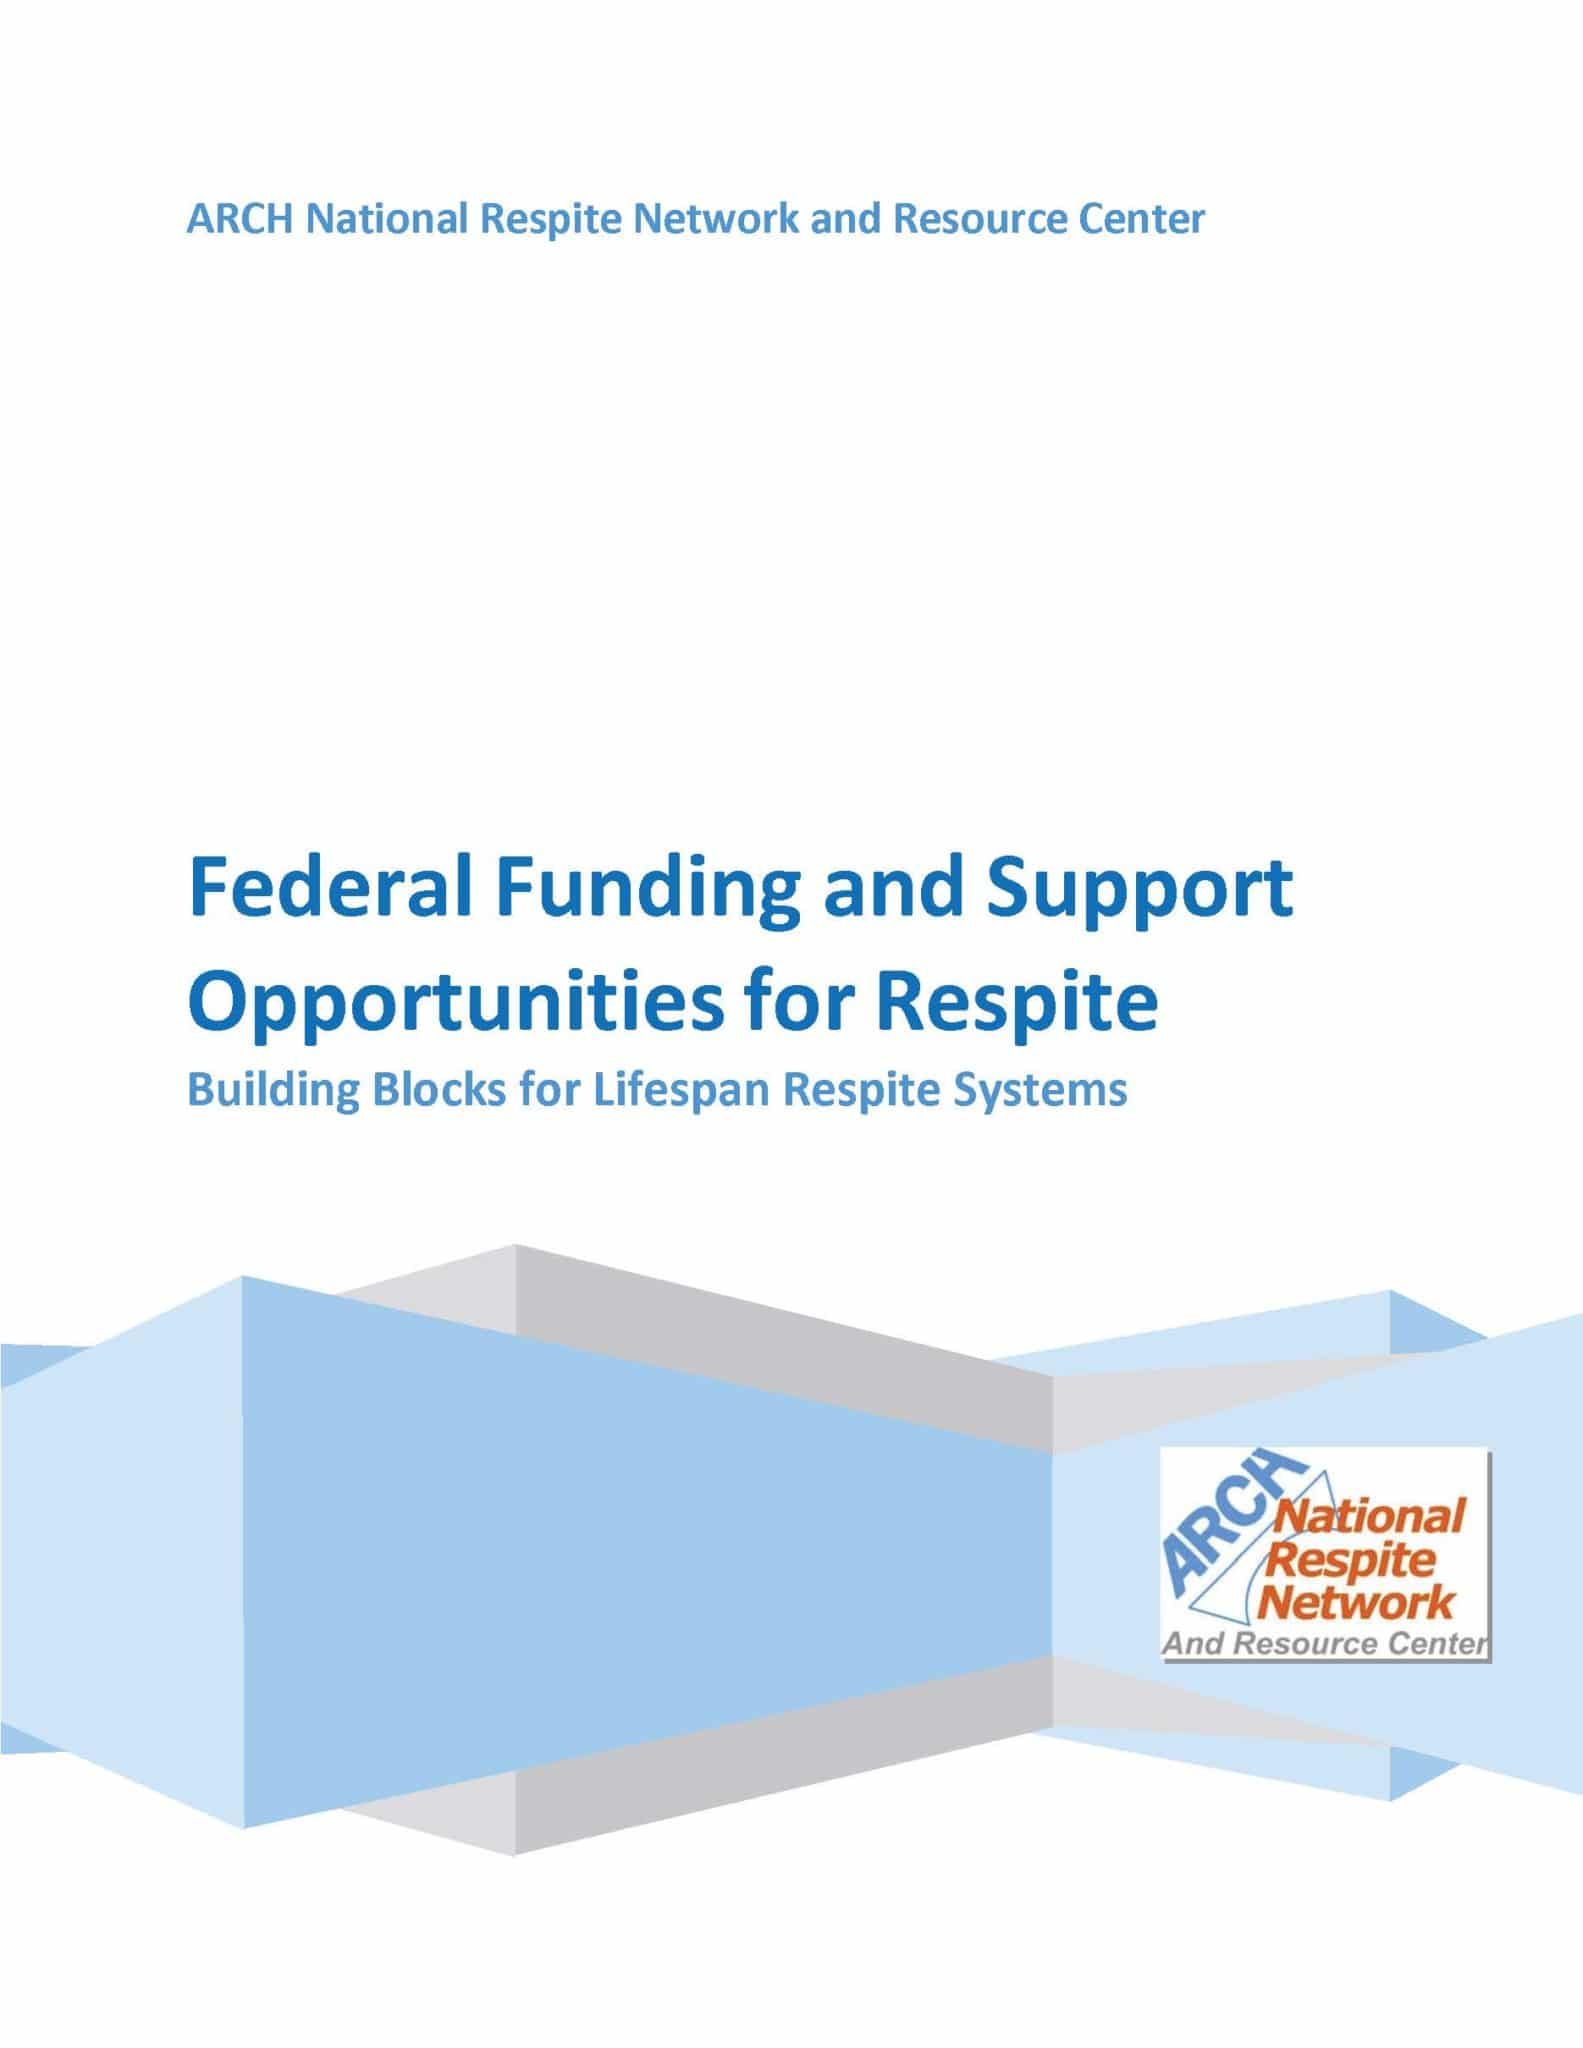 2021 Federal Funding And Support For Respite